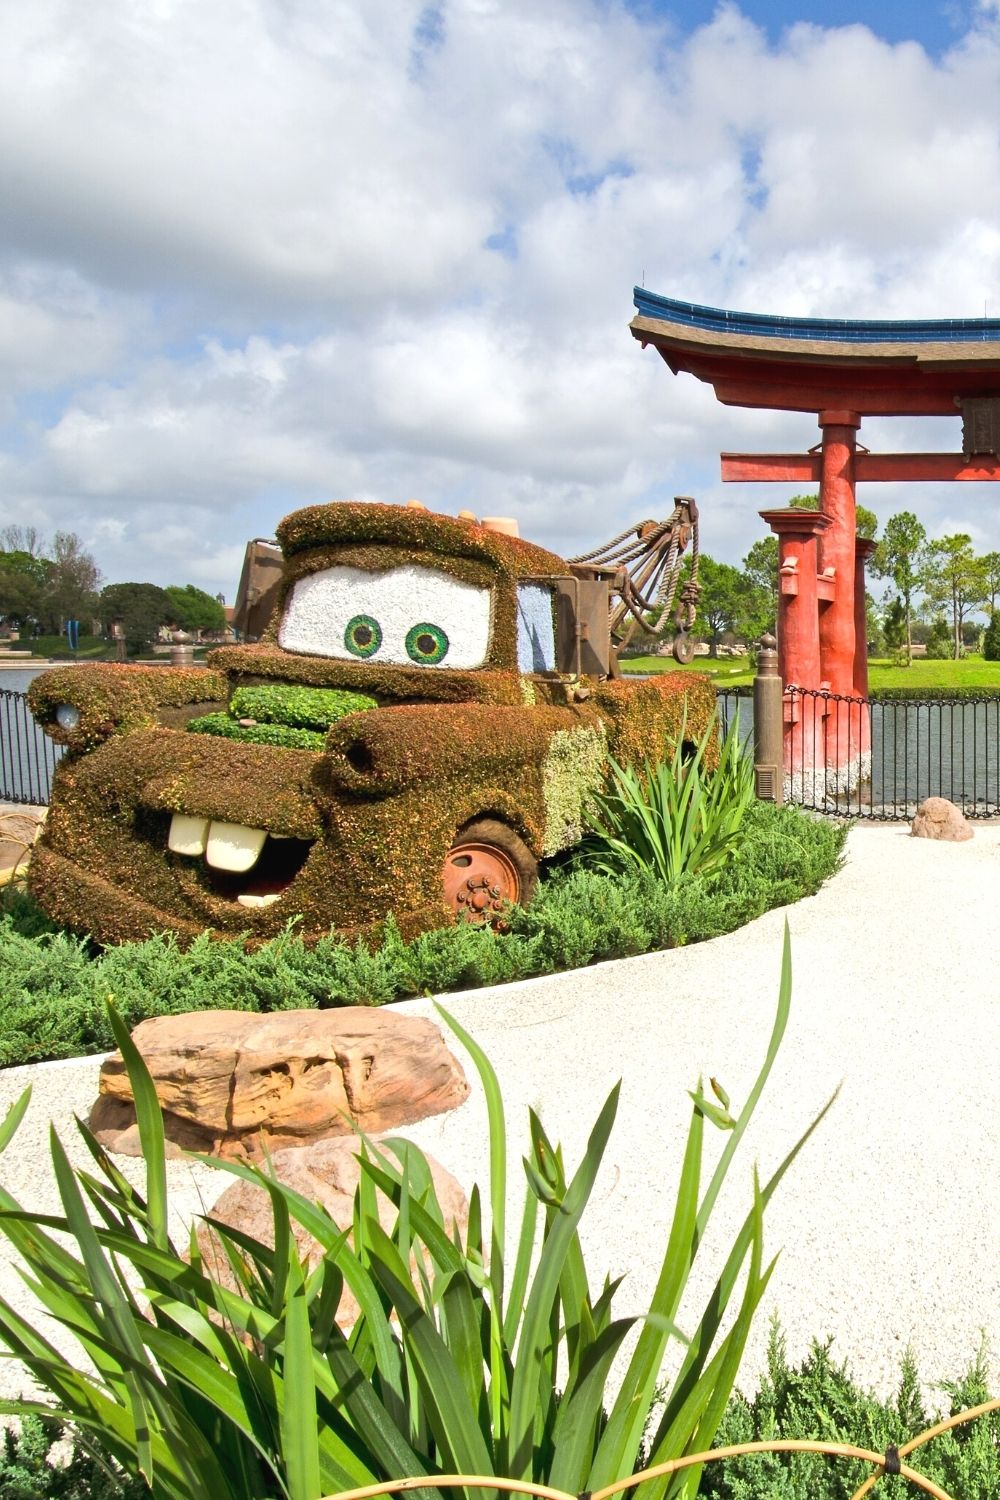 A topiary of Cars character Mater is on display at Epcot in Disney World